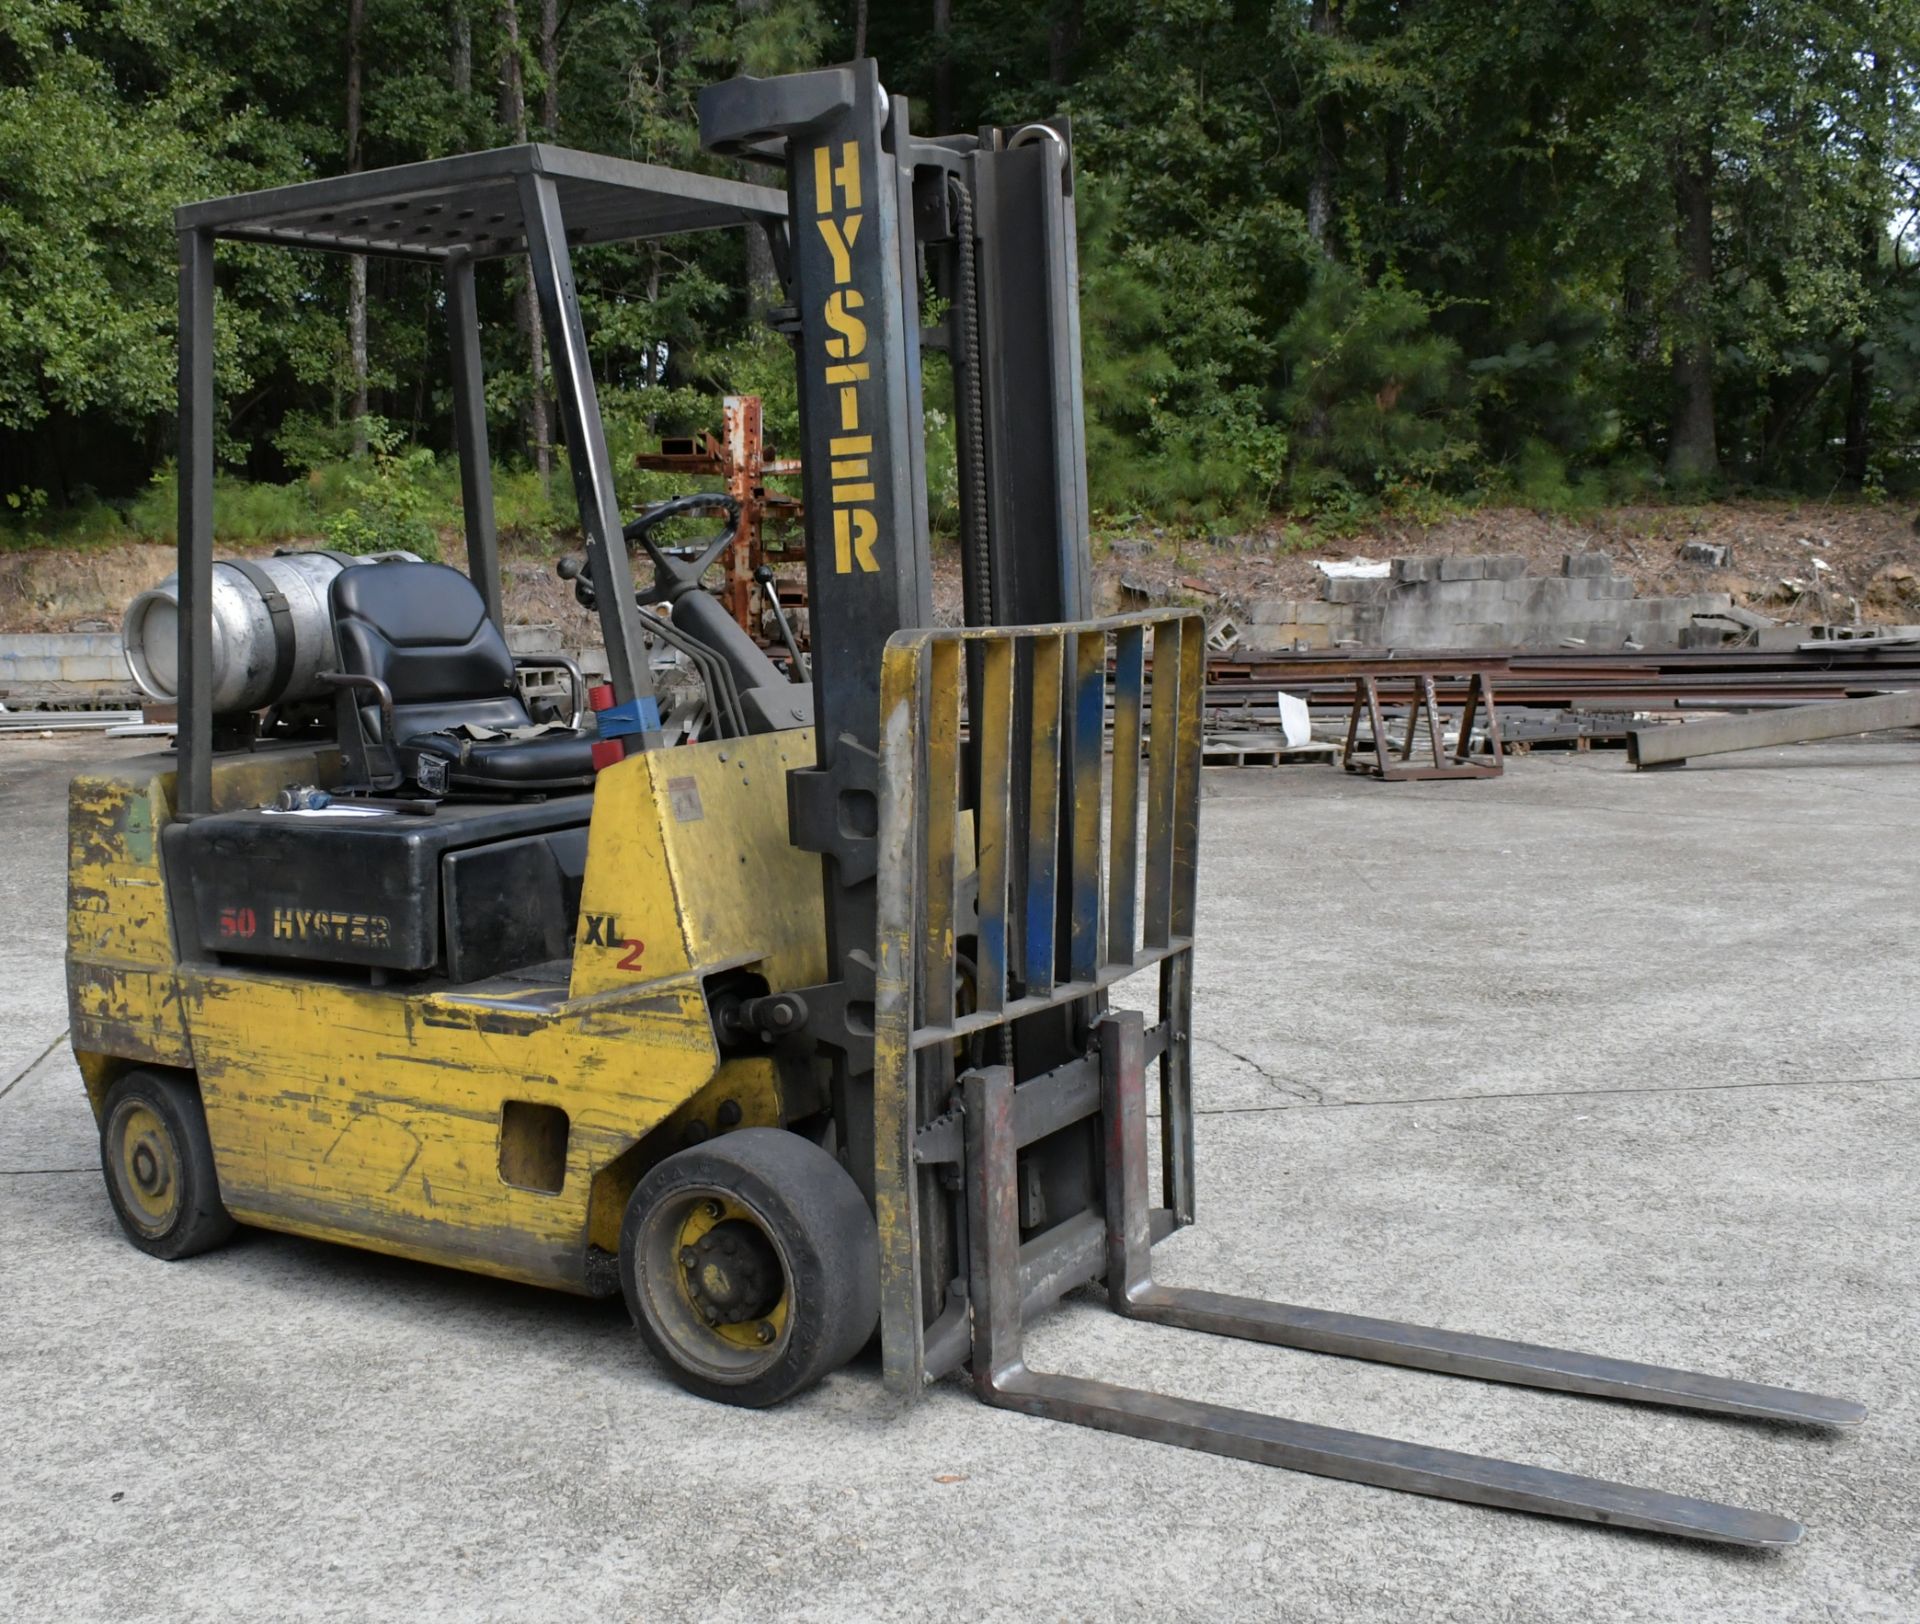 Hyster Model 550XL, 5,600-Lbs. x 131" Lift Capacity LP Gas Fork Lift Truck, S/n C187V10018R, 2-Stage - Image 2 of 7